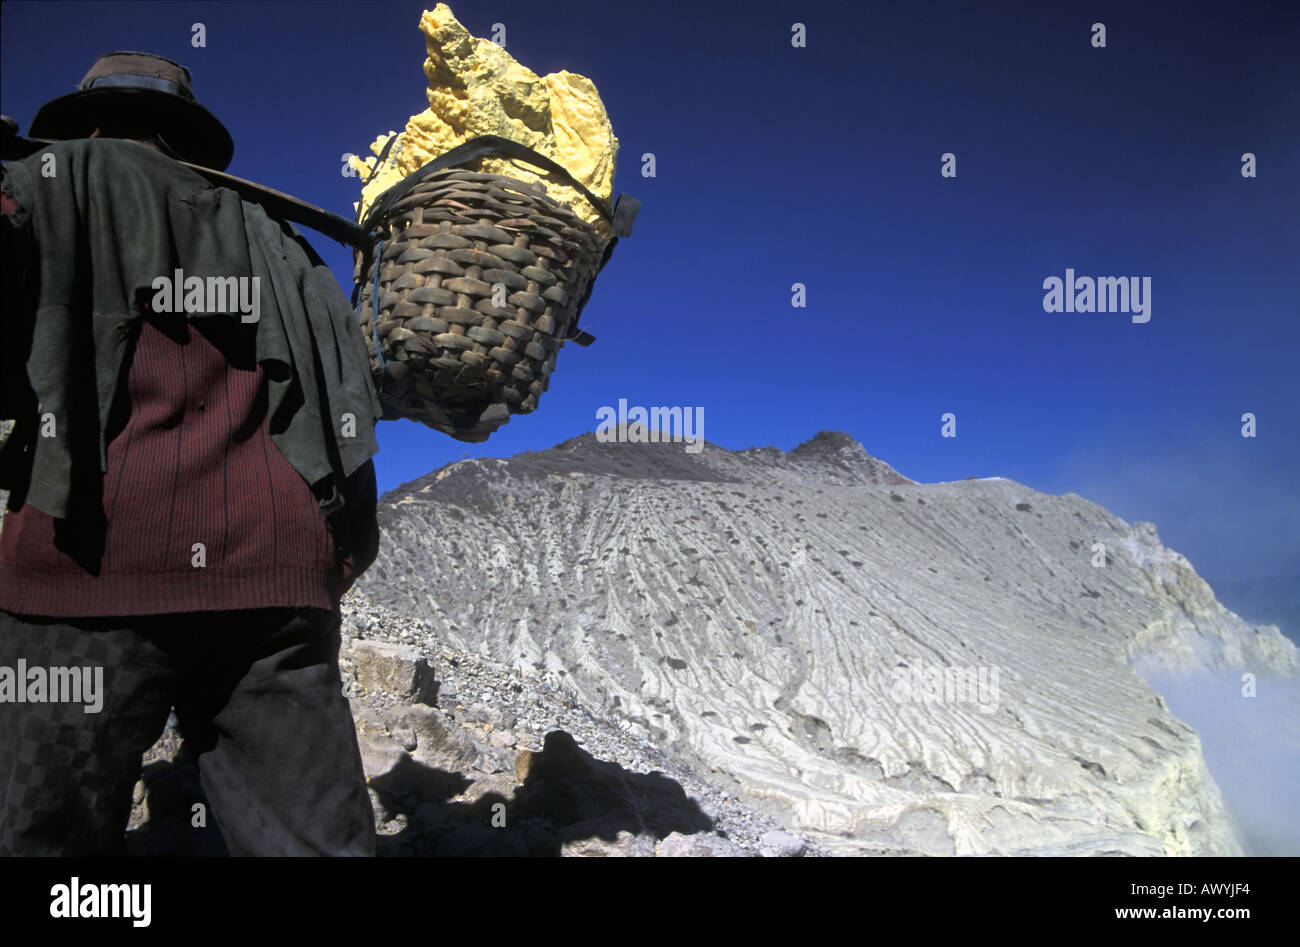 Miner carrying chunks of yellow elemental sulphur out of the active volcanic crater of Gunung Ijen eastern Java Indonesia Stock Photo